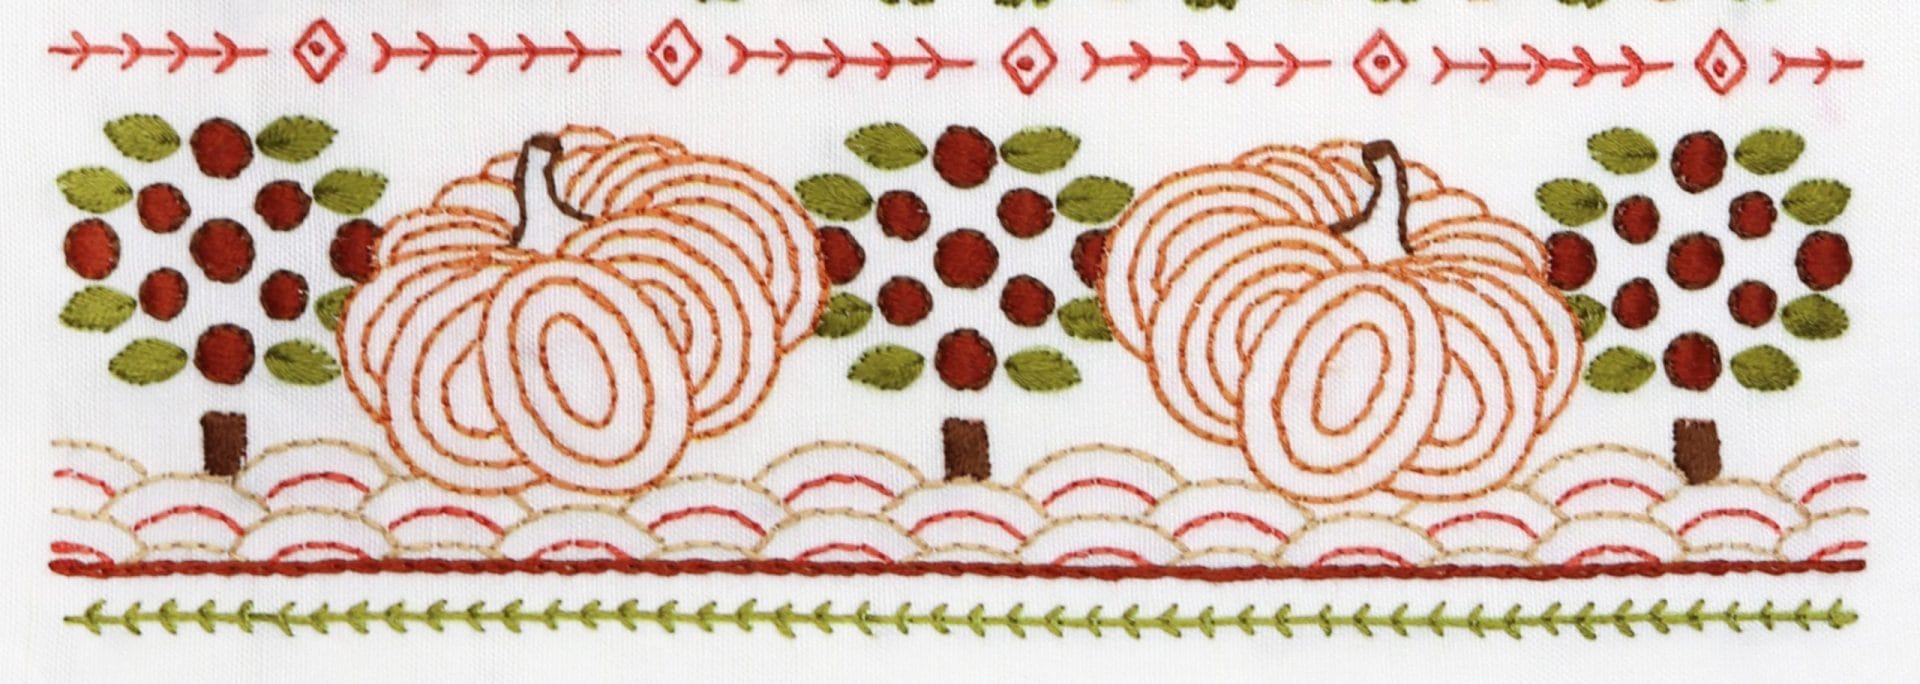 Embroidered detail from traditional embroidery stitch sampler with fall themes